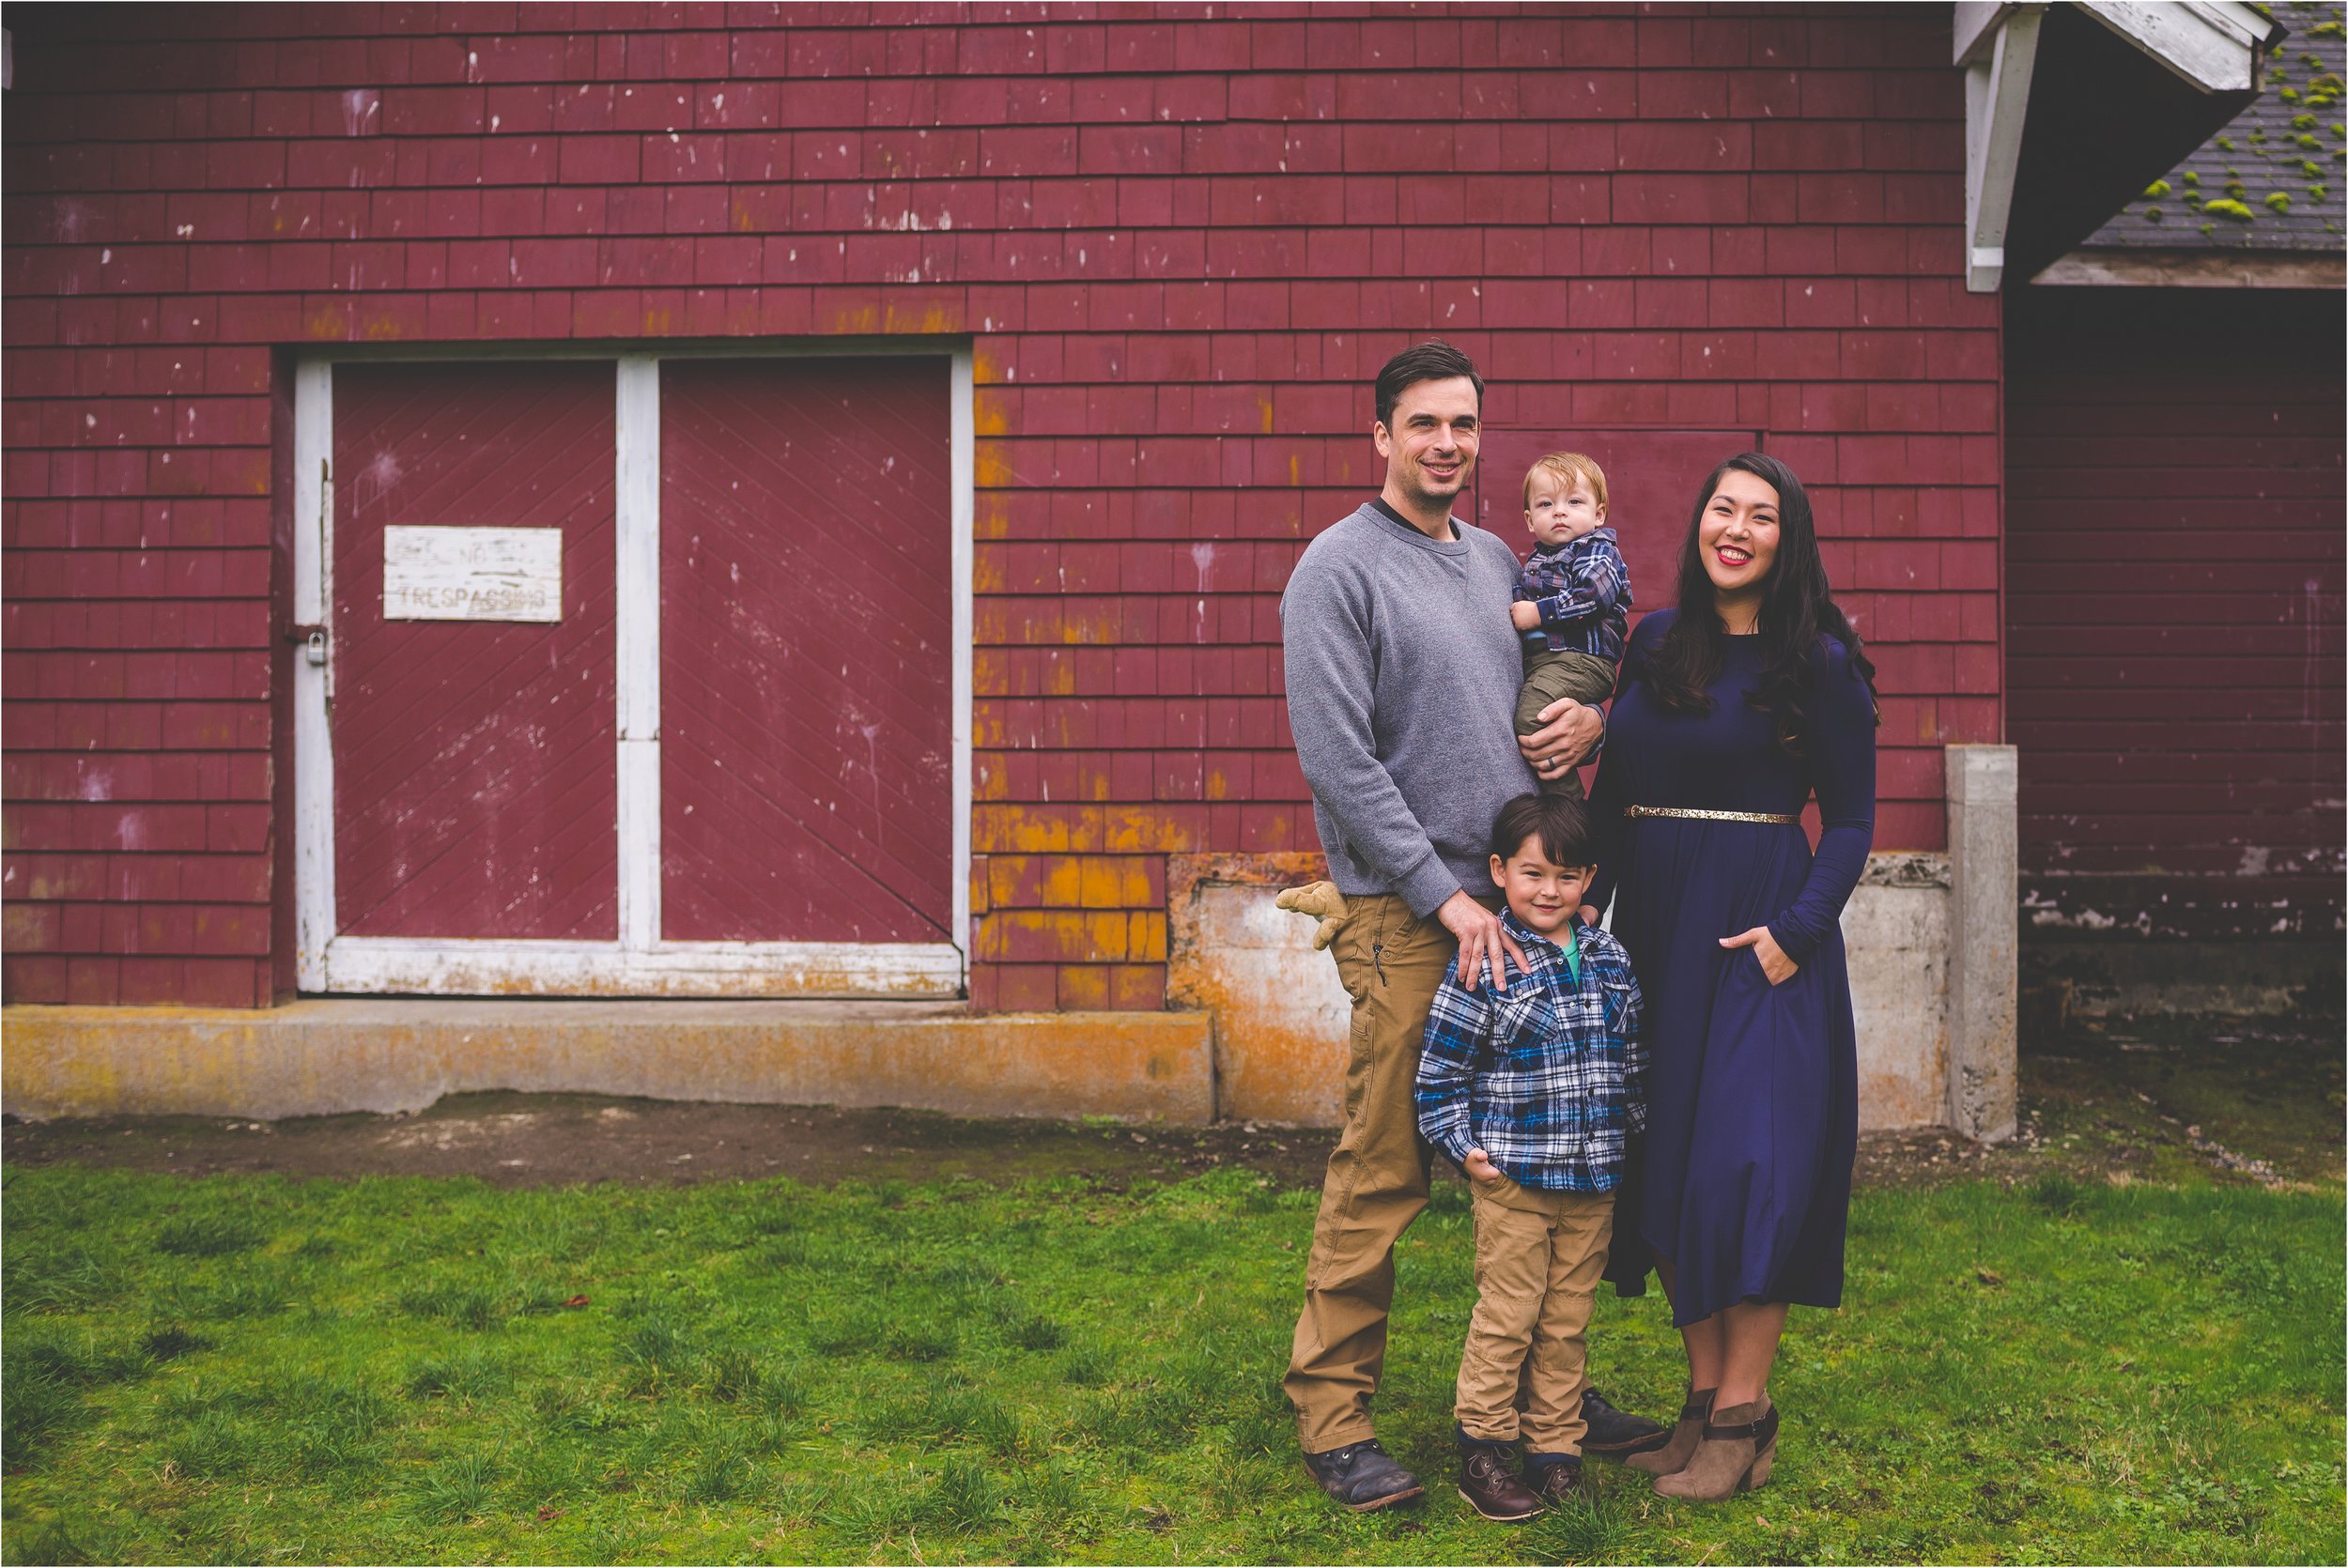 fort-steilacoom-park-family-session-jannicka-mayte-pacific-northwest-lifestyle-photographer_0004.jpg